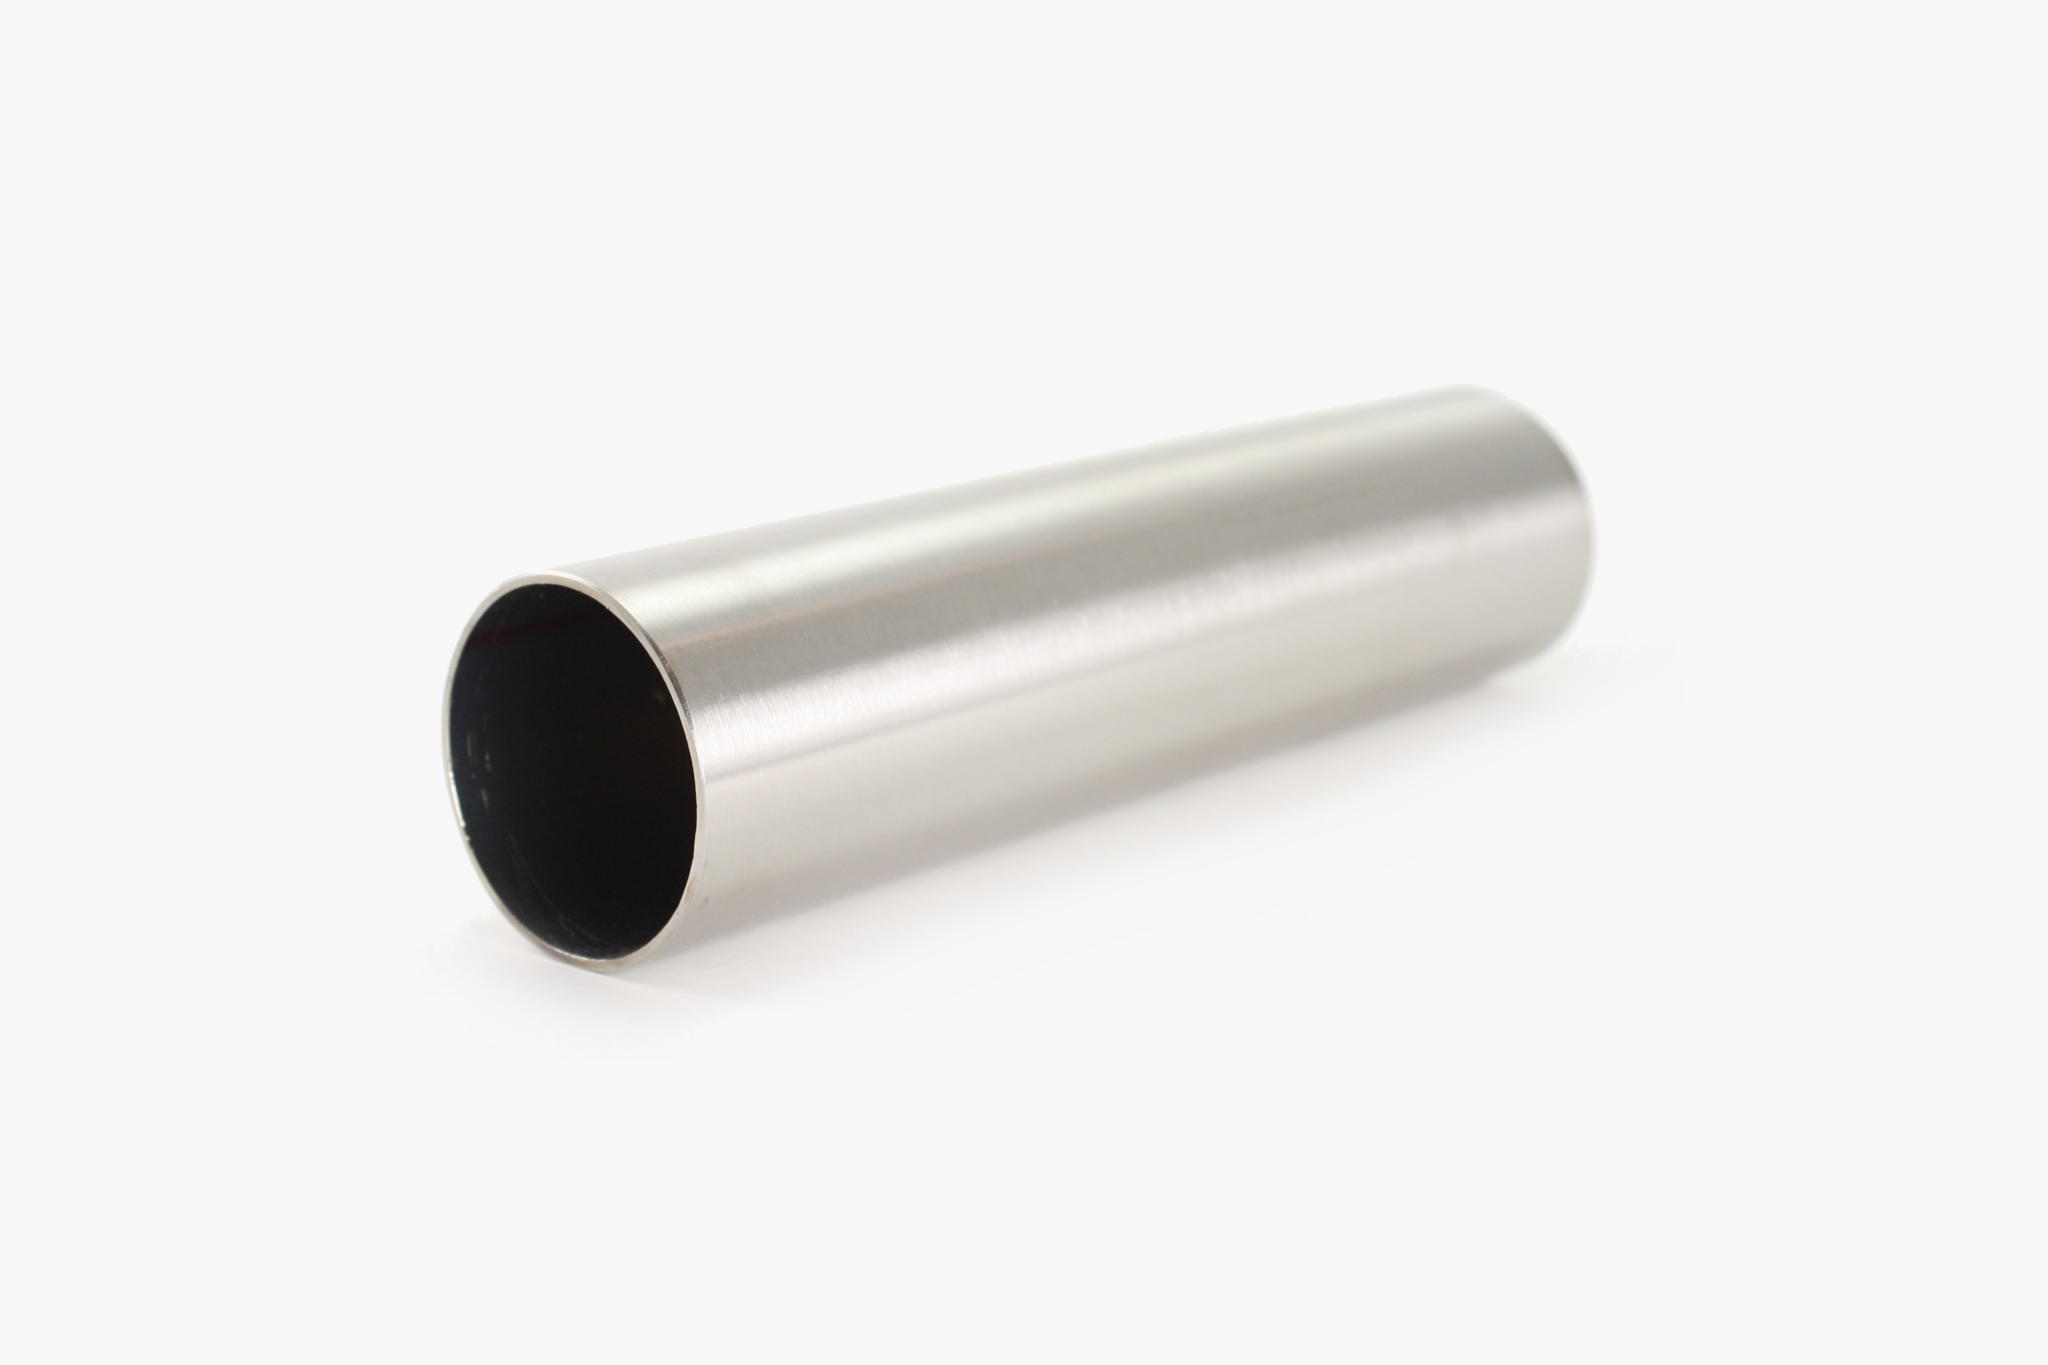 Round handrail tubing - Brushed stainless steel